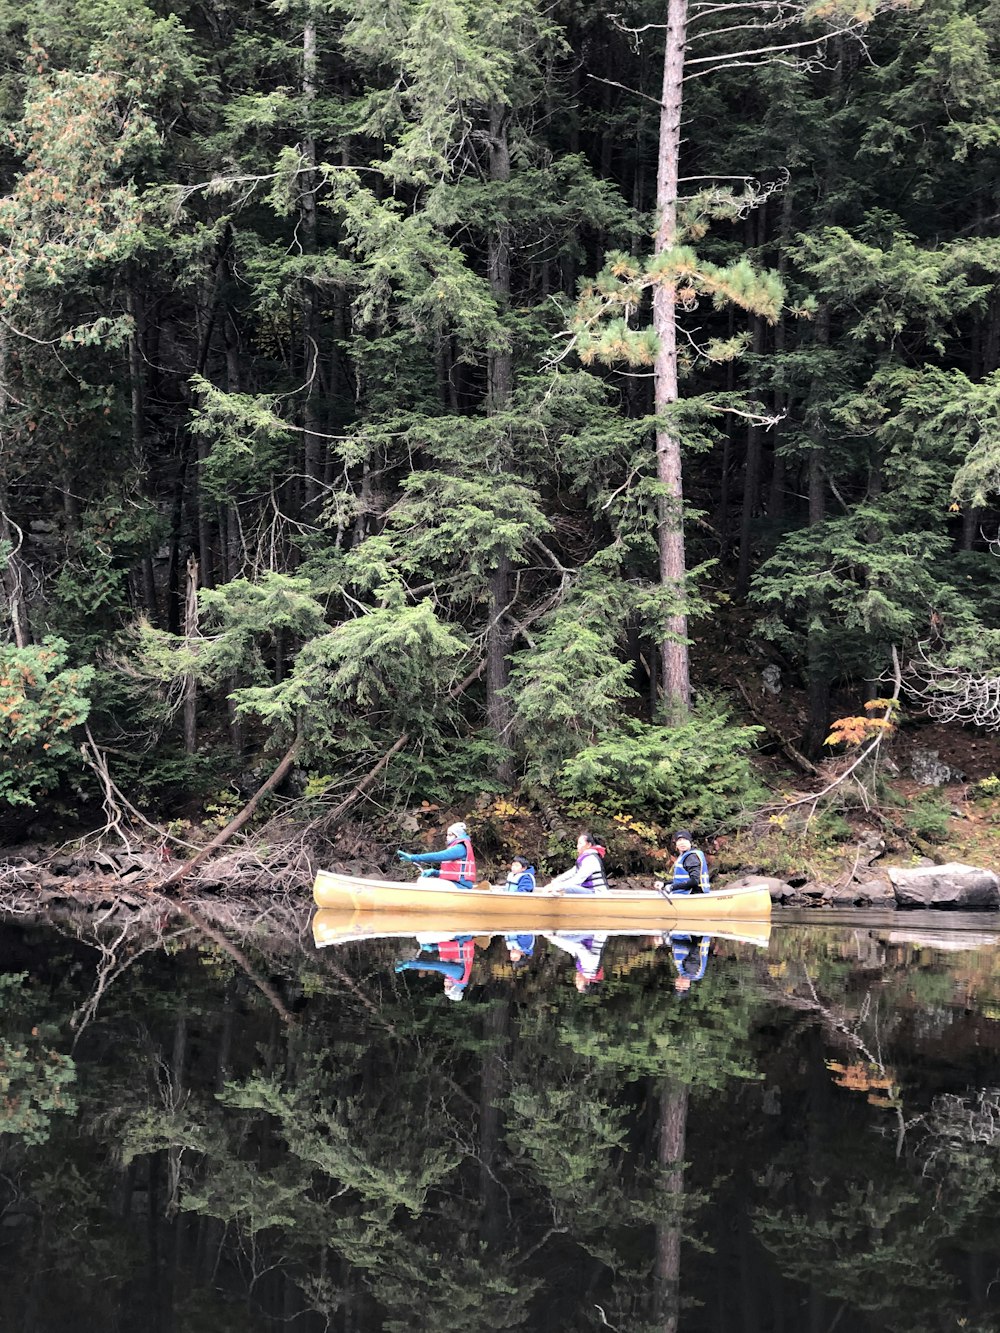 shallow focus photo of people riding boat on body of water